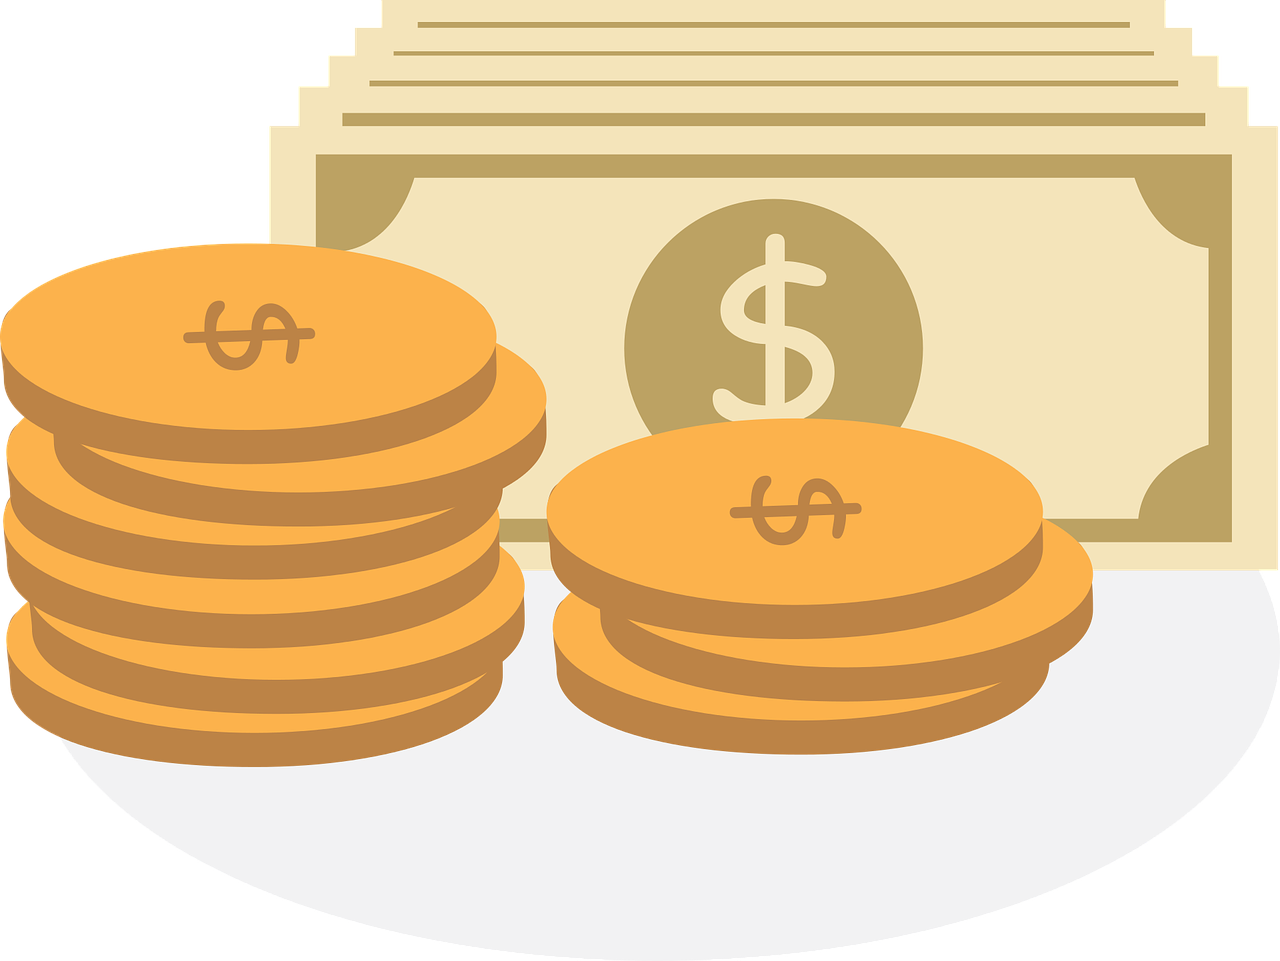 Money Coin Cash Finance Currency  - Memed_Nurrohmad / Pixabay